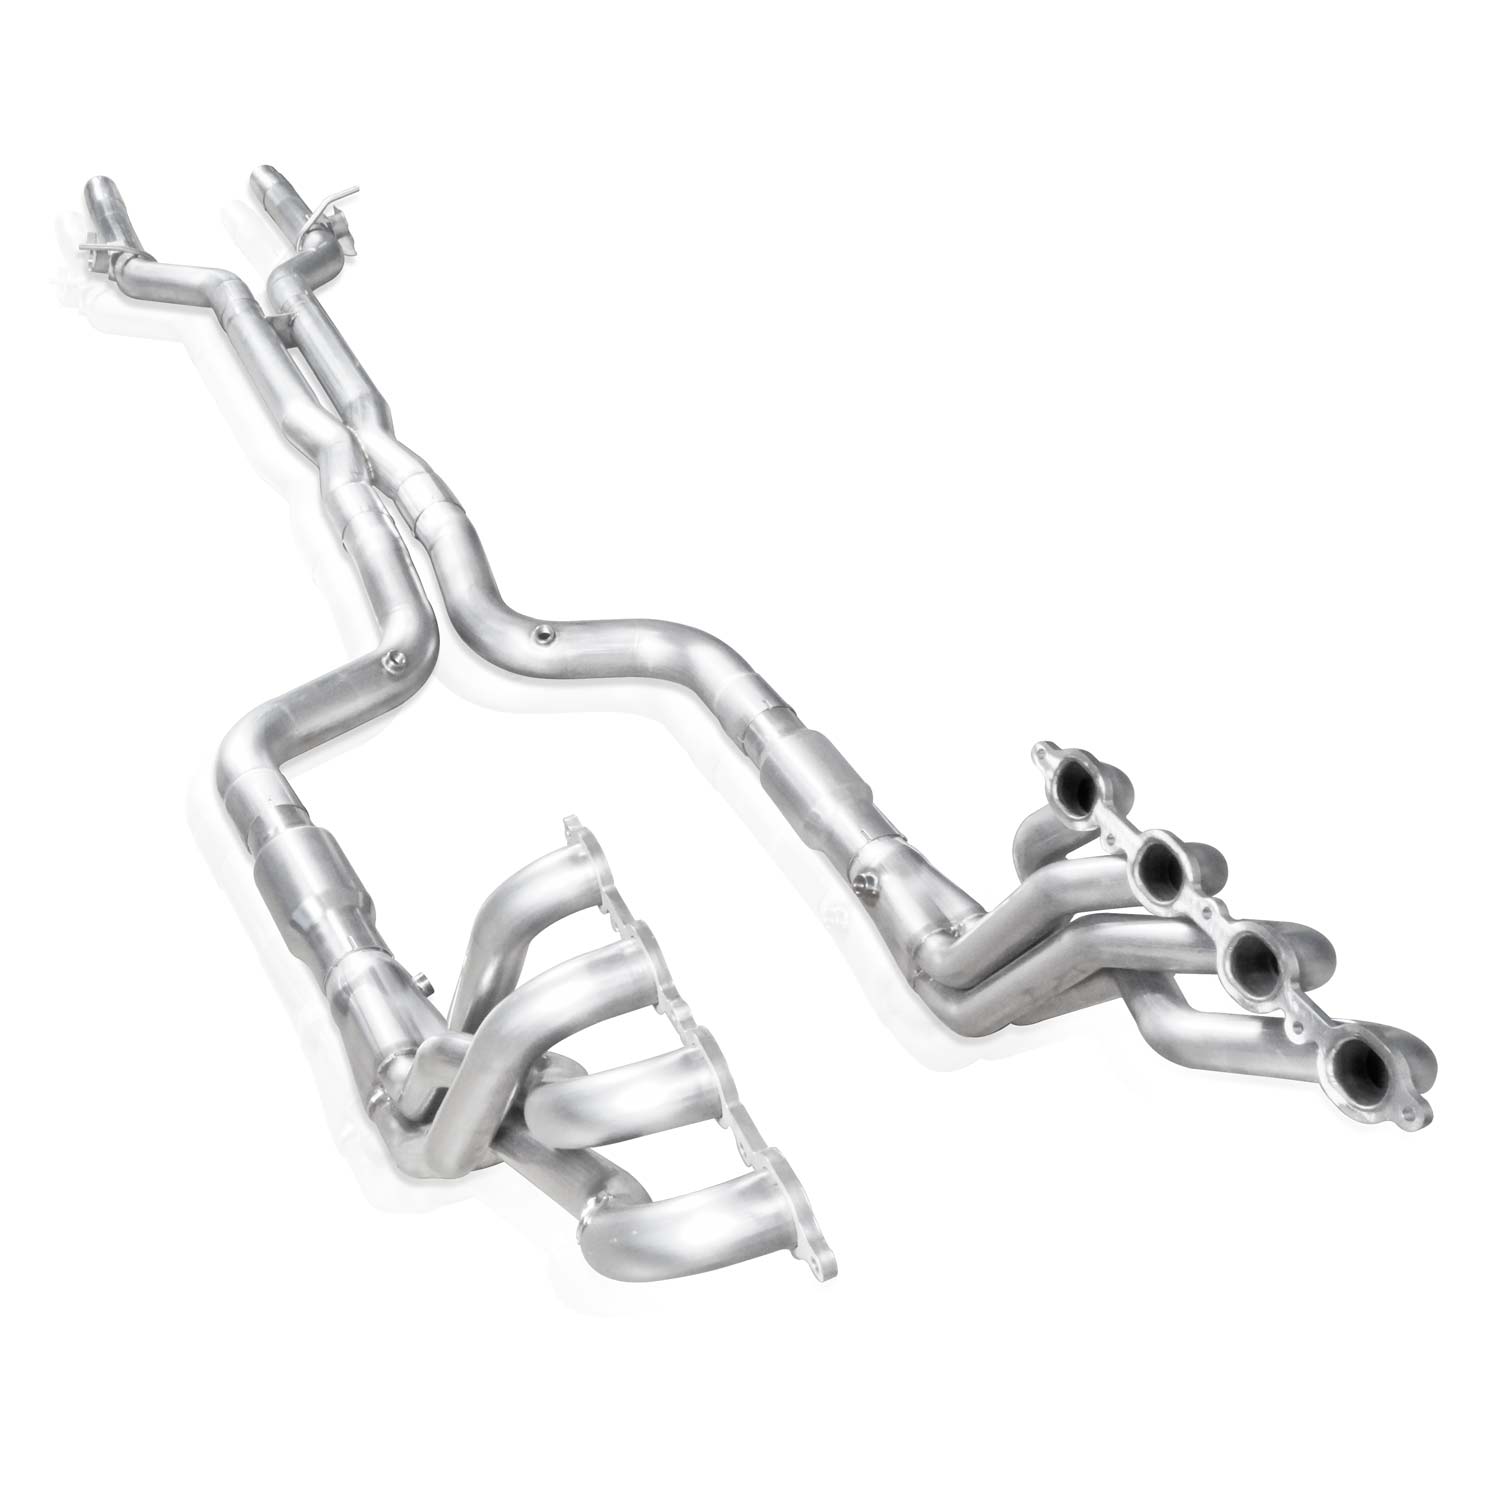 Stainless Power Headers 1-7/8" Pri. X-Pipe Catted, Valve Delete Factory Connect - SSTubes